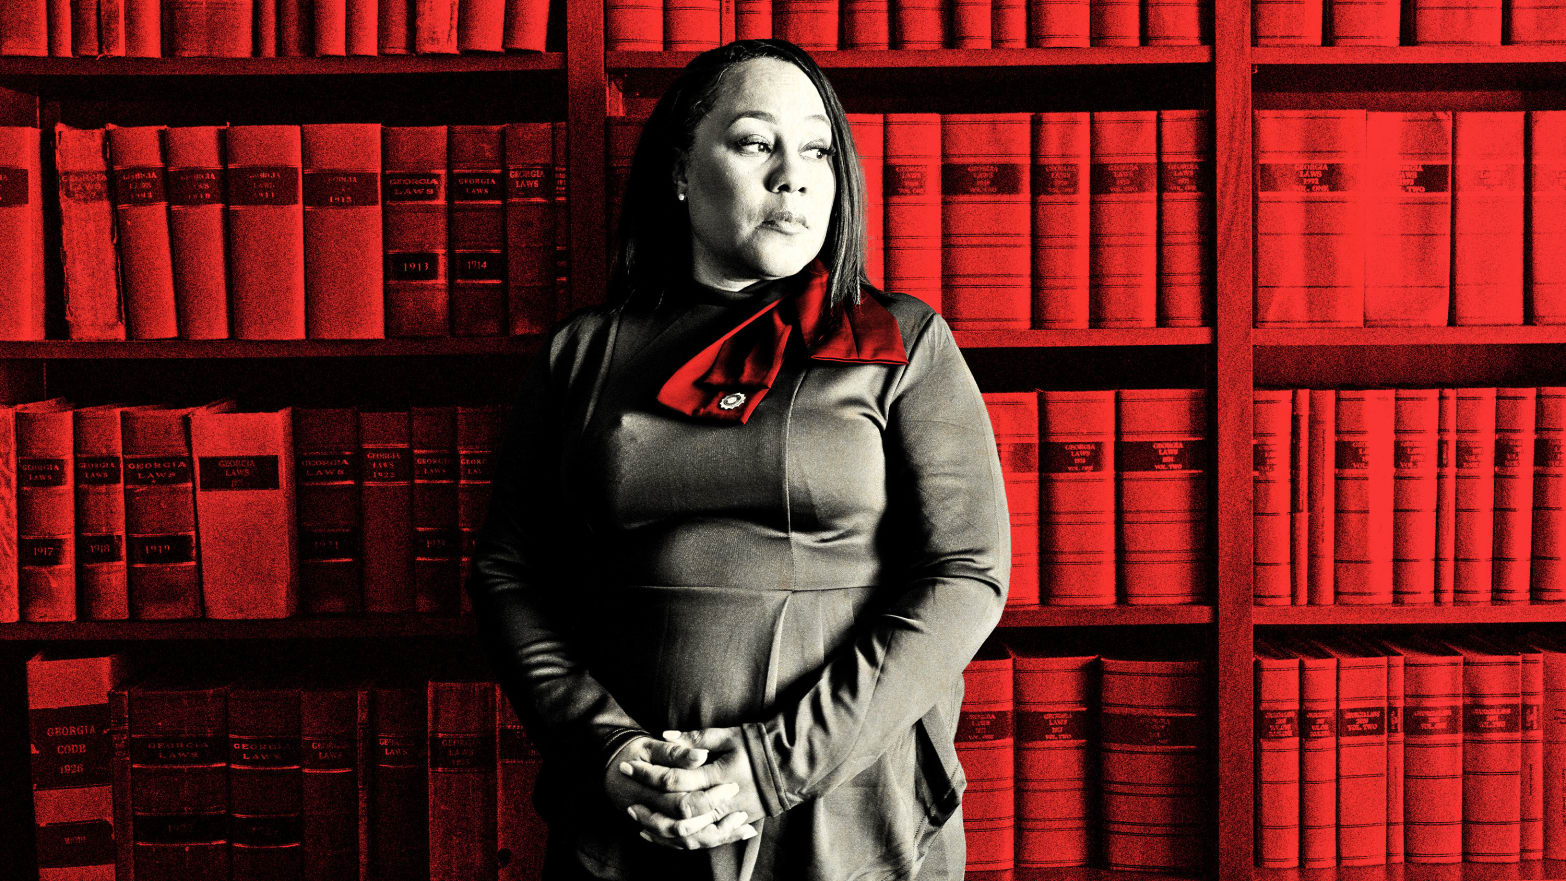 A photo illustration of Fani Willis where she is standing in front of a book case